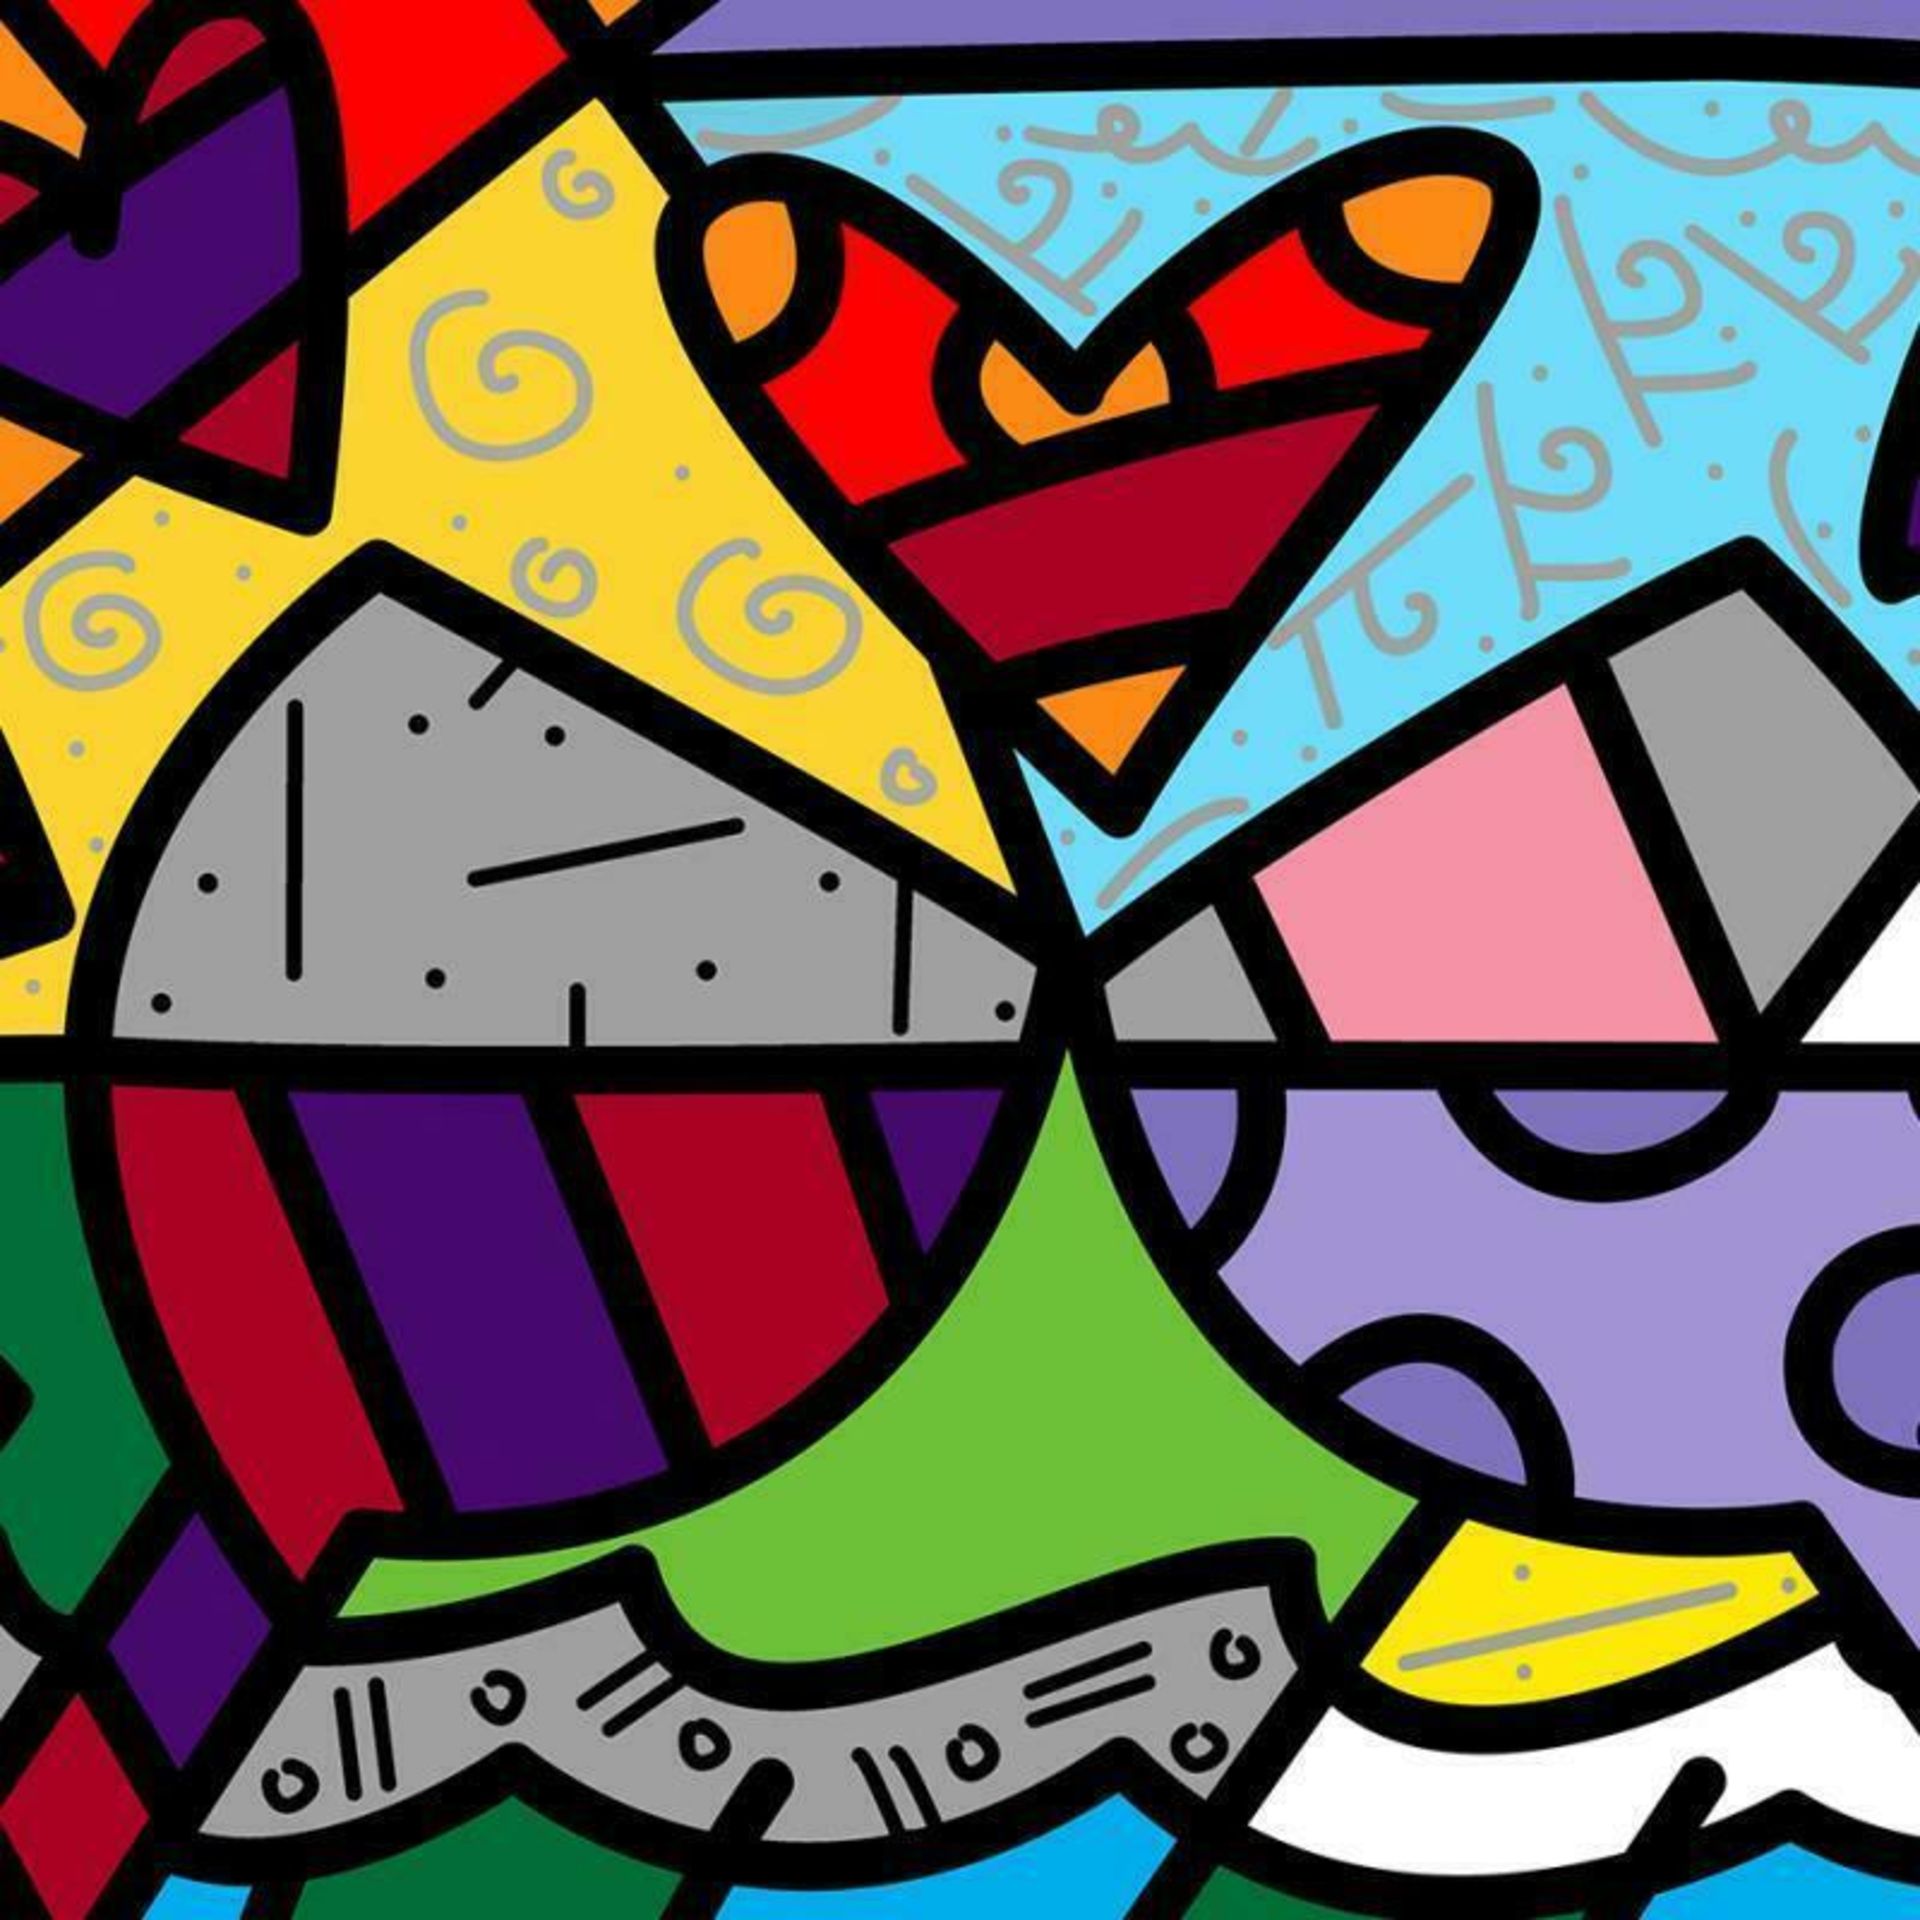 Toast To Love Glasses by Britto, Romero - Image 2 of 2